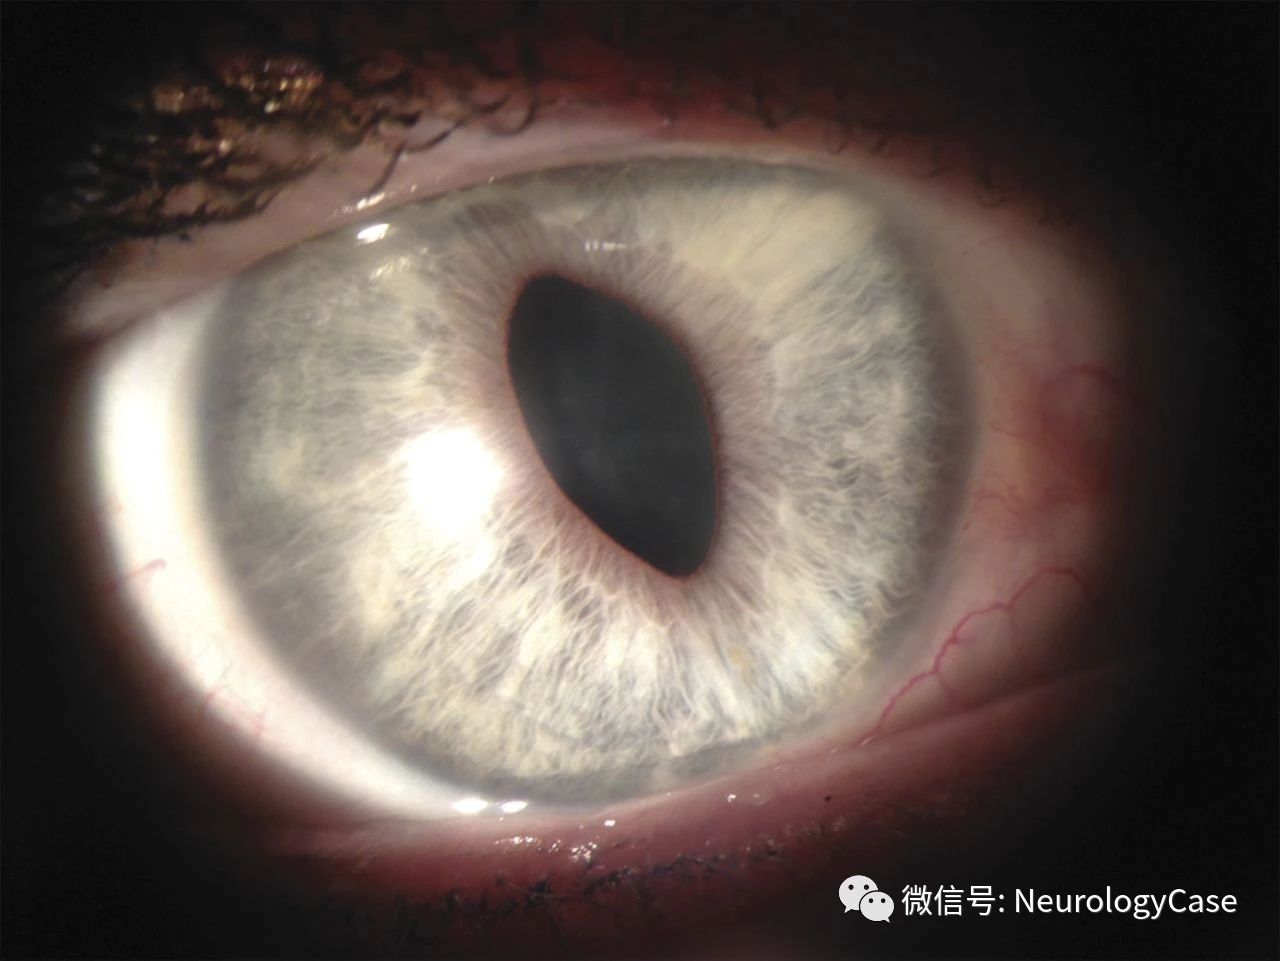 Neurology：不寻常的<font color="red">Adie</font>样瞳孔：猫眼瞳孔